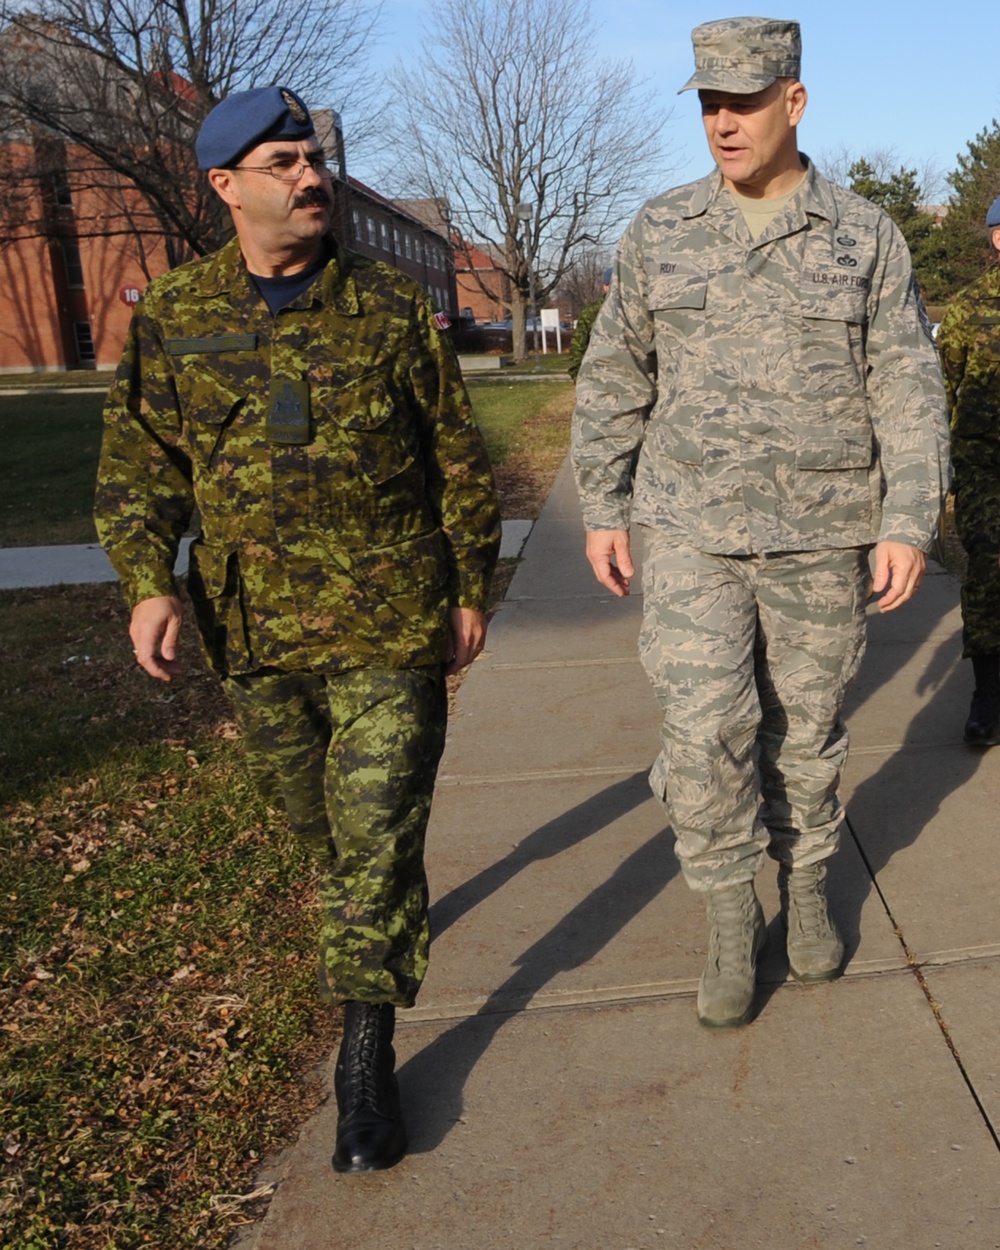 Top Air Force NCO Visits Canada to Develop Partnership